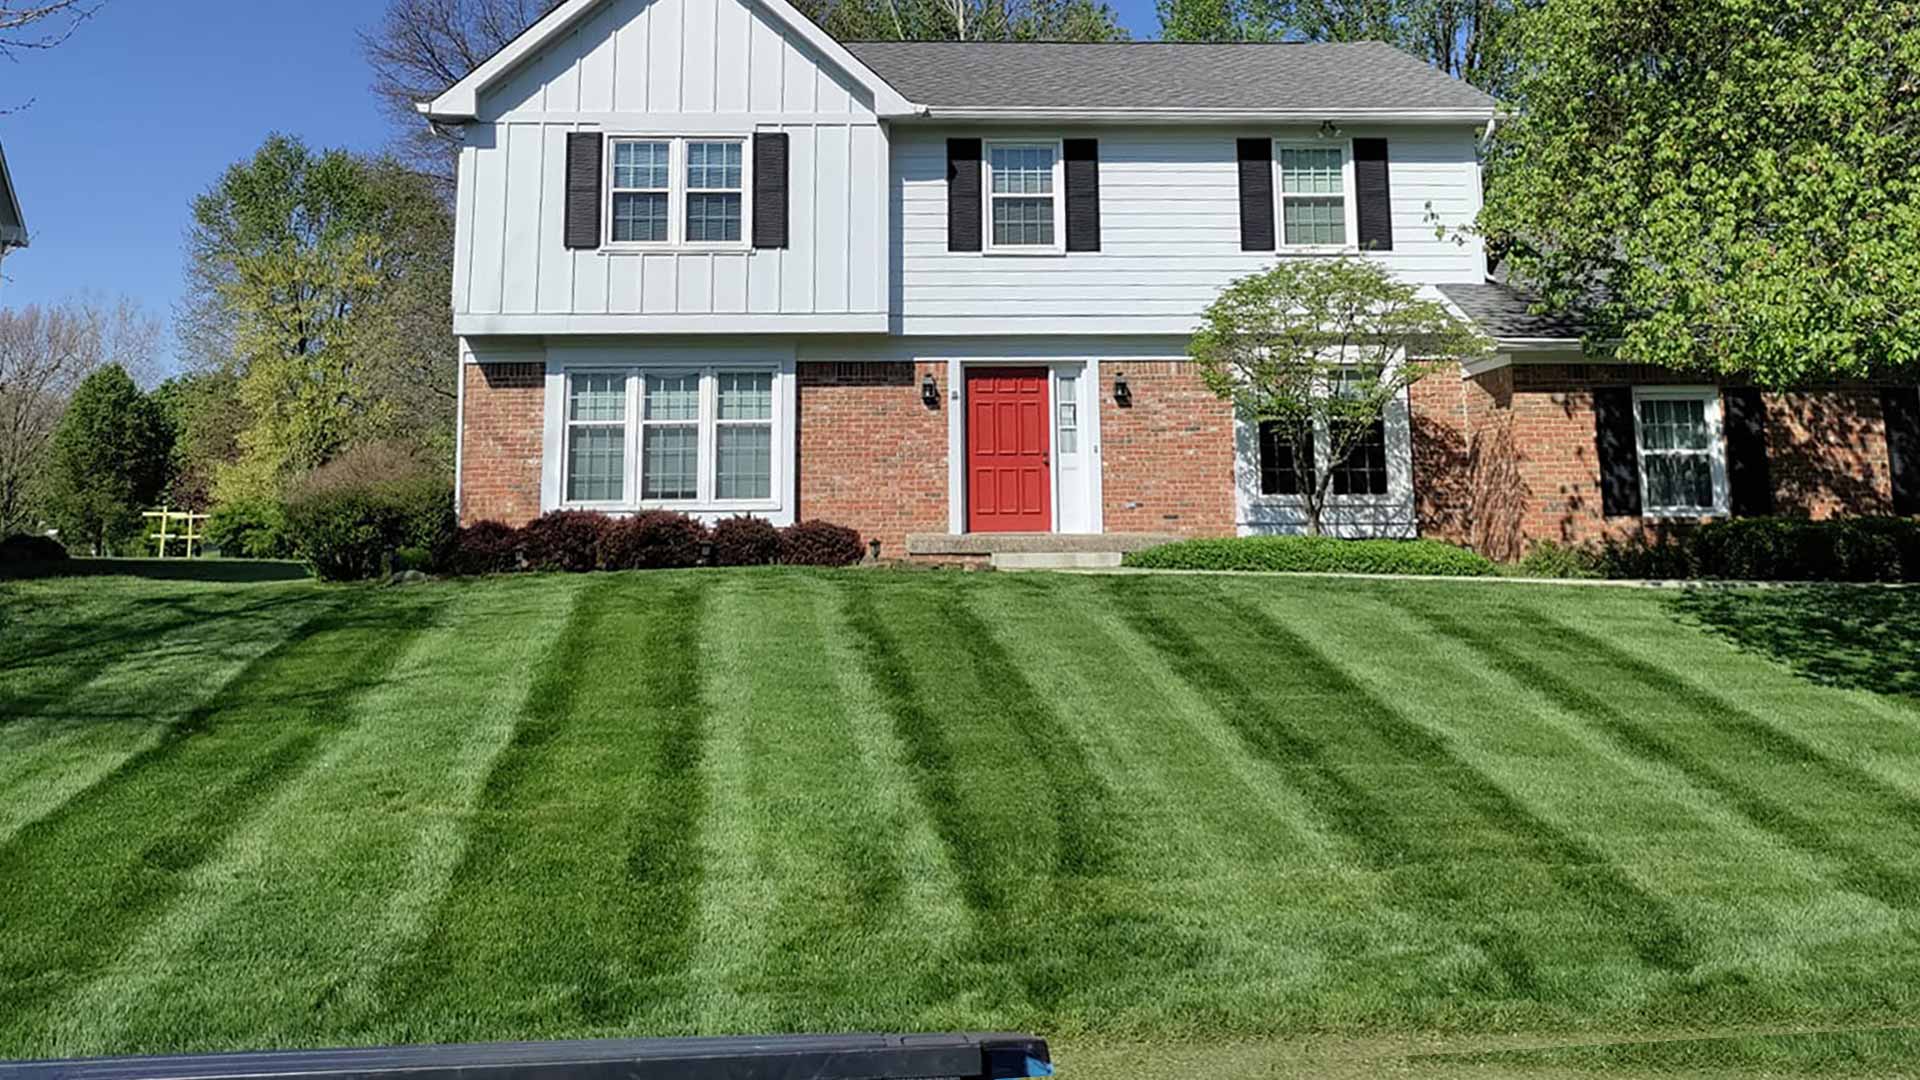 Westfield, IN home property with landscape and lawn maintenance services.